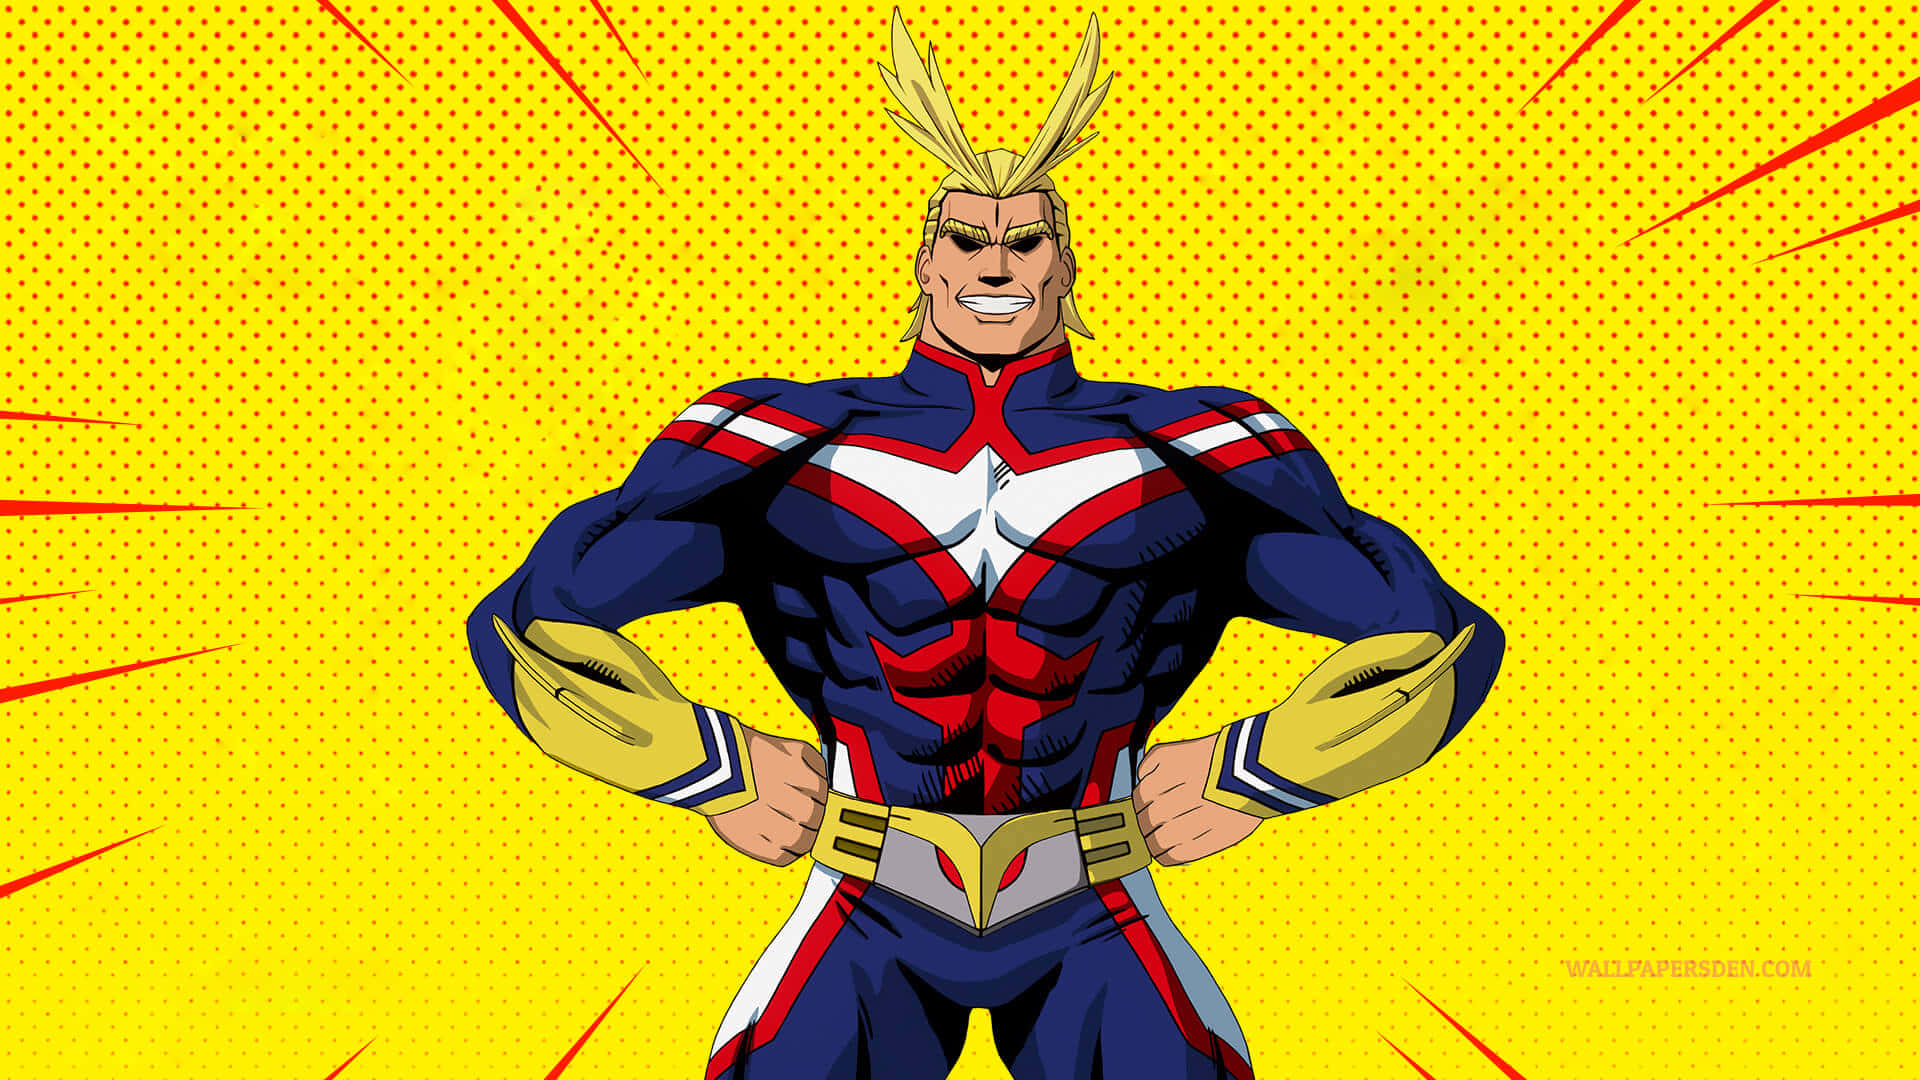 The Symbol of Peace - All Might